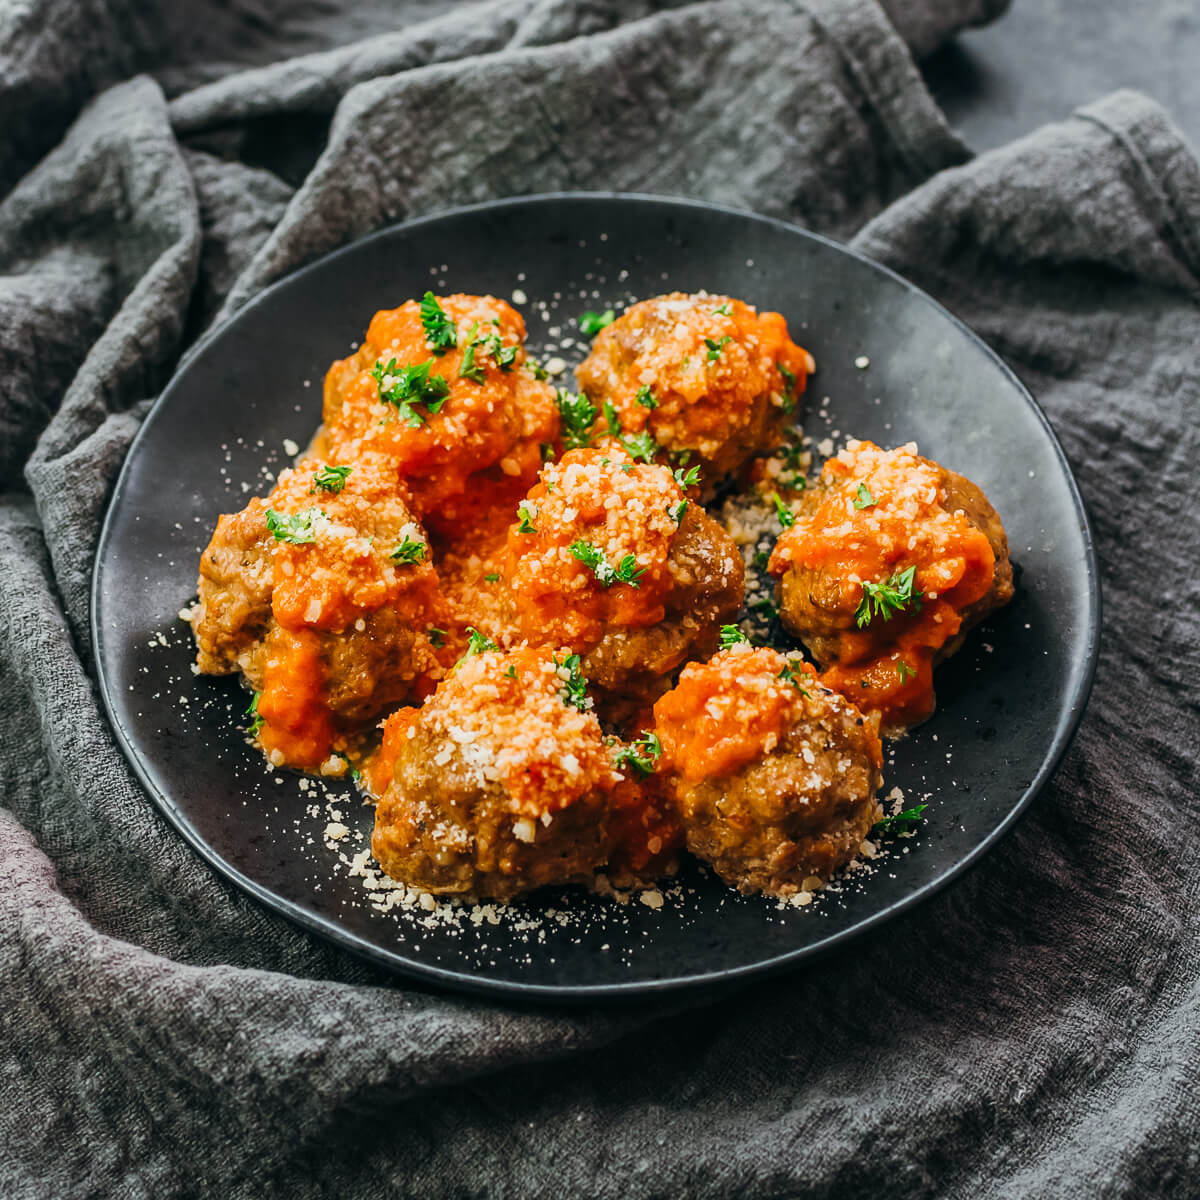 meatballs with sauce on black plate